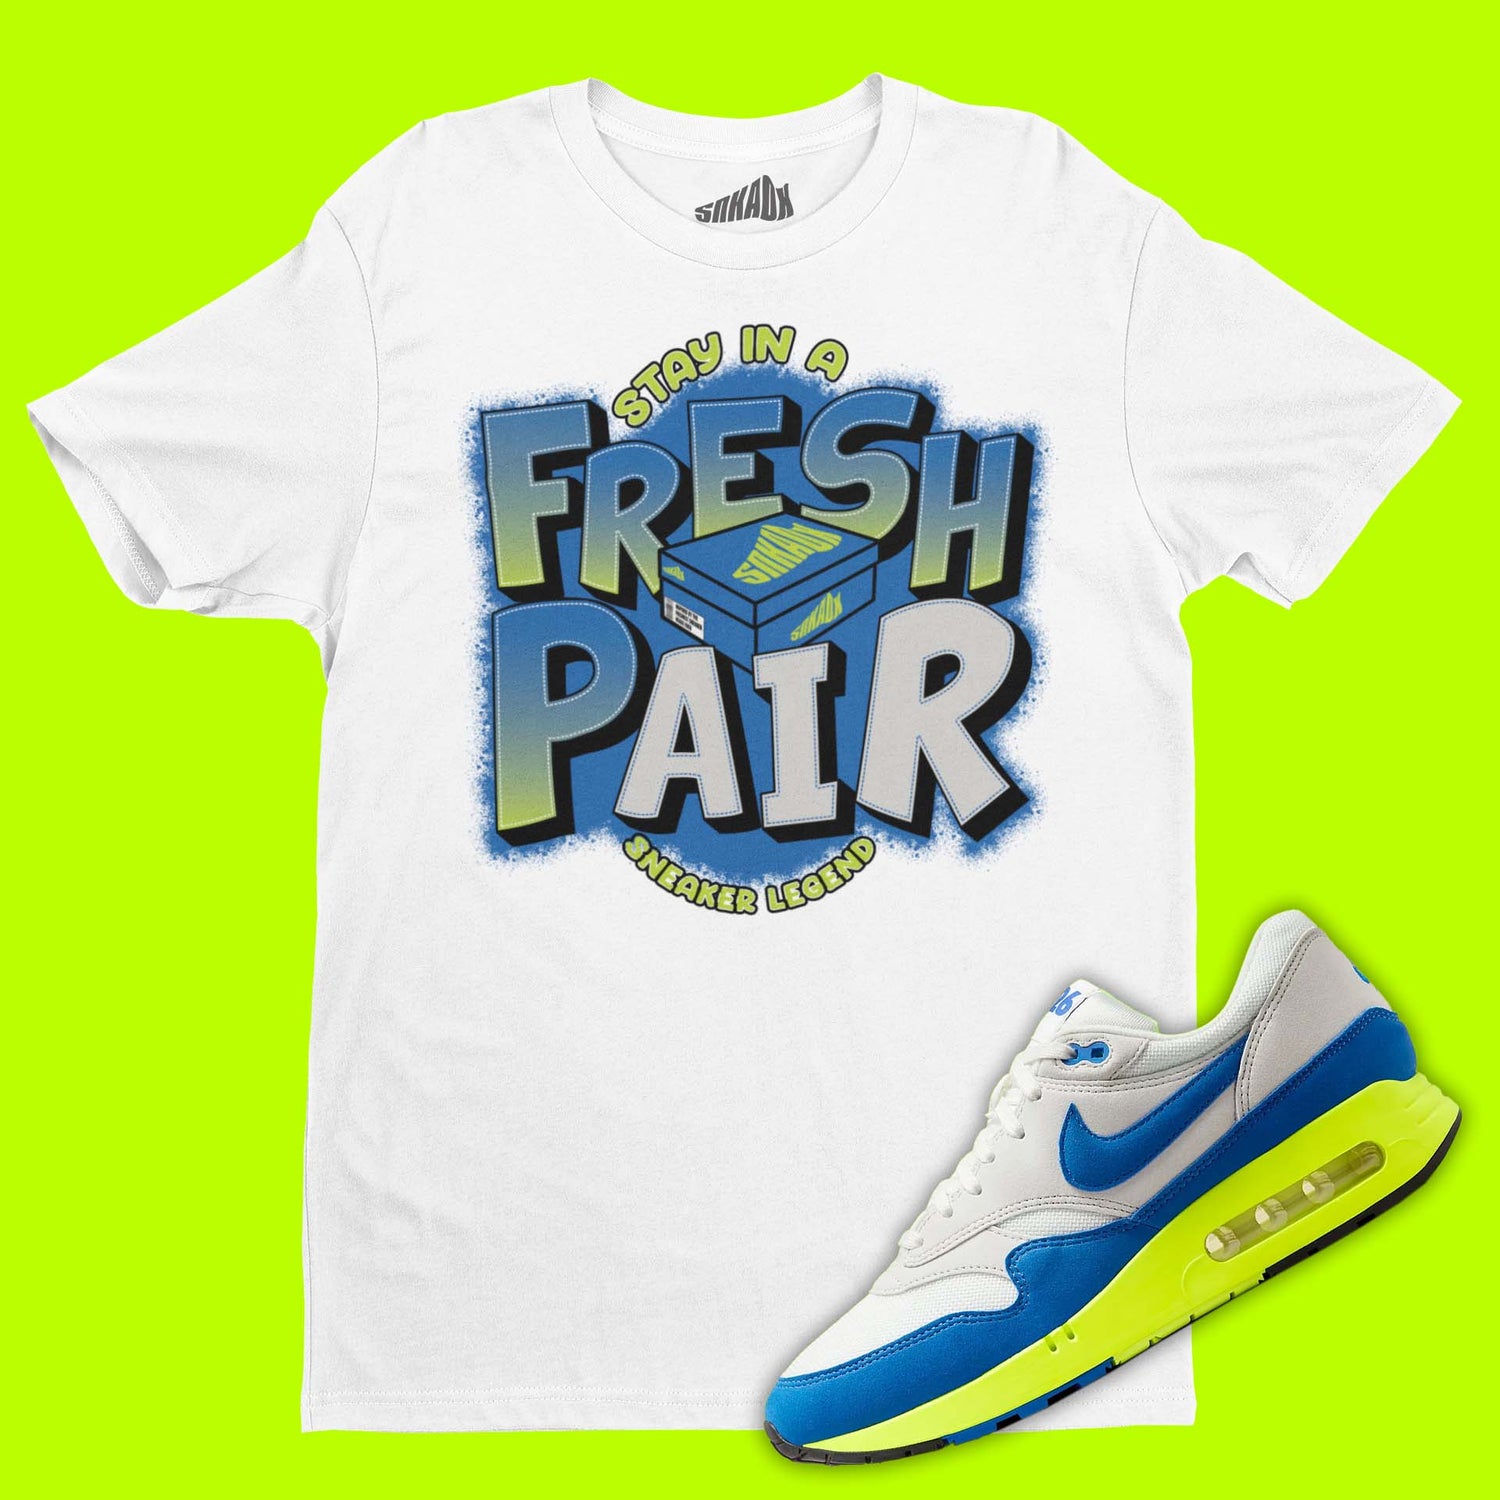 Female Shirt to Match Sneakers